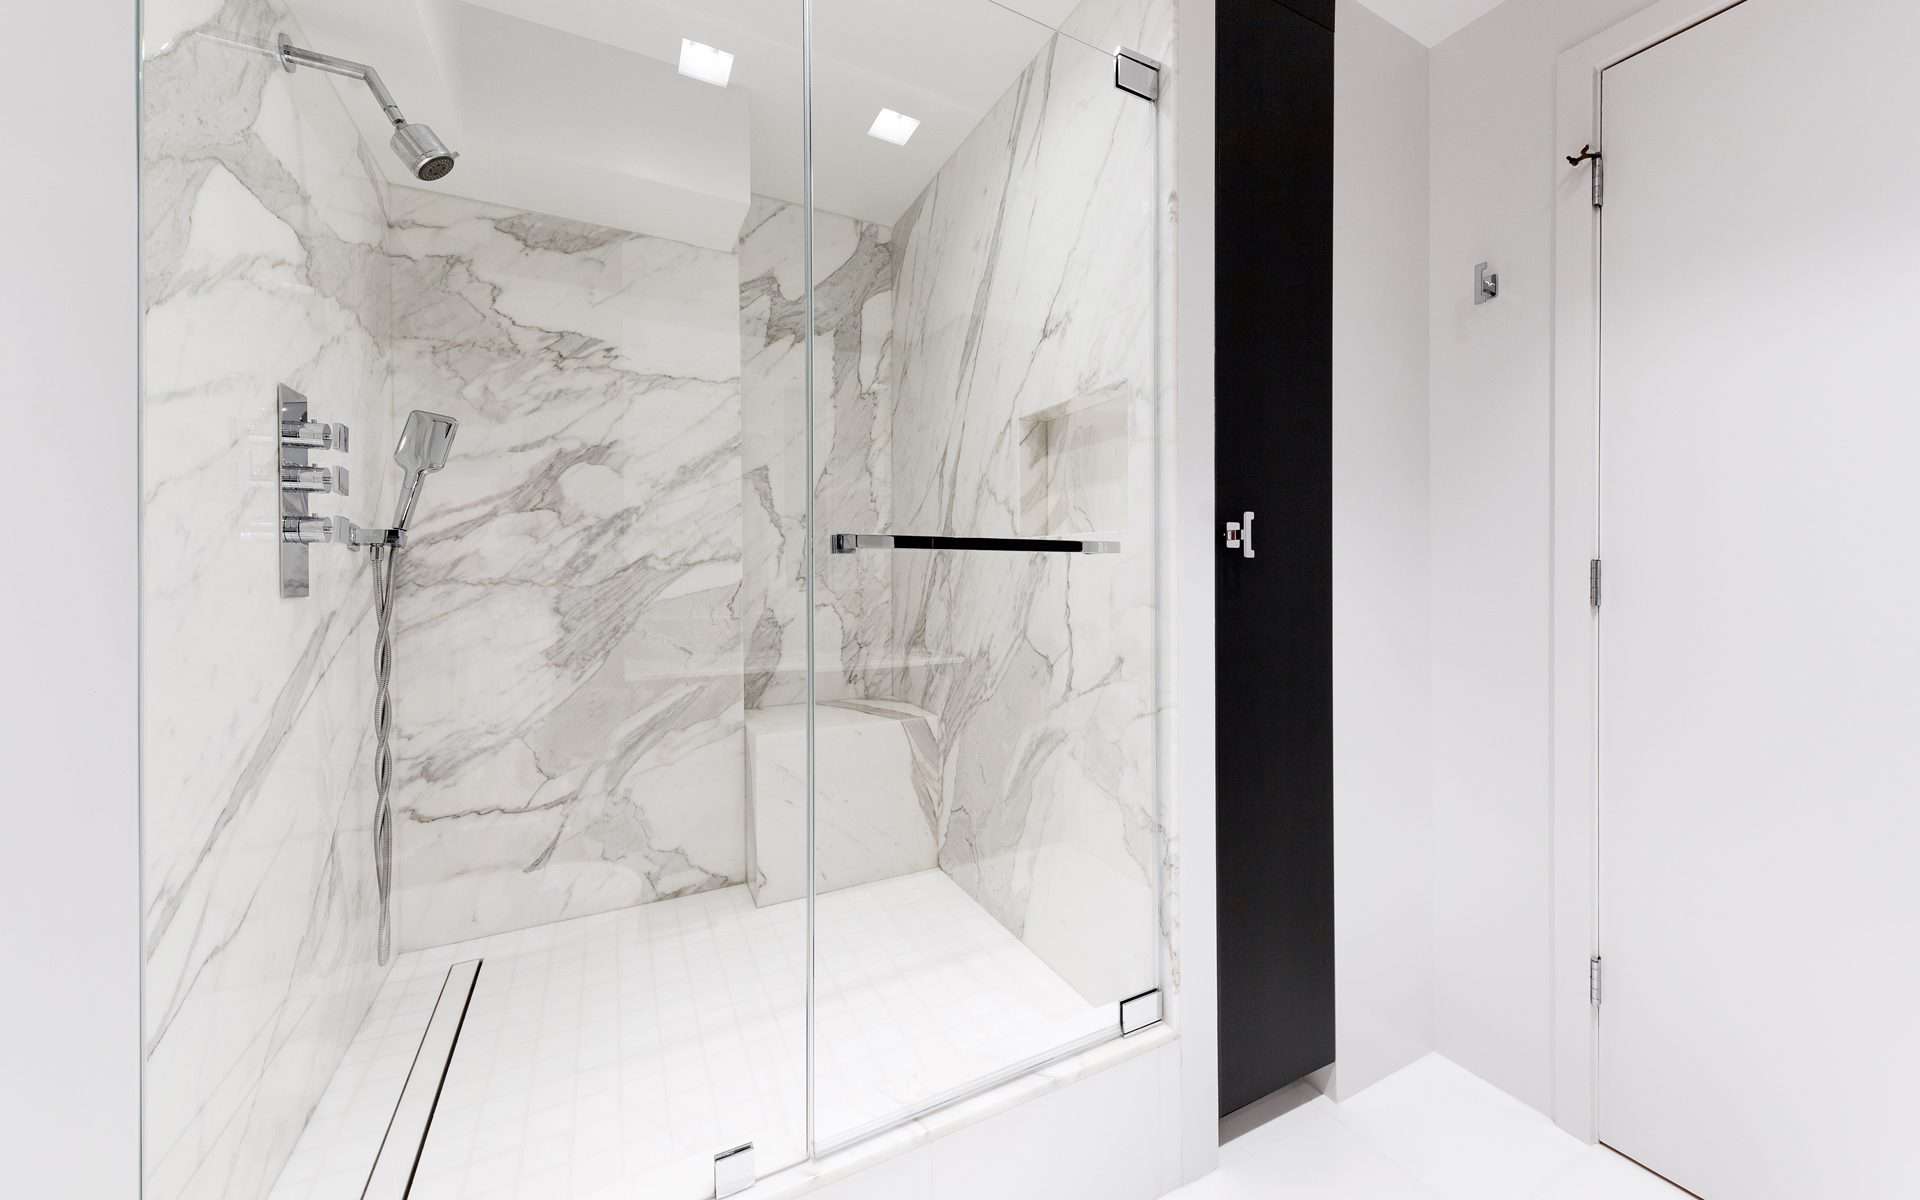 Bilotta custom bathroom features expansive white and gray marble shower with modern fixtures.